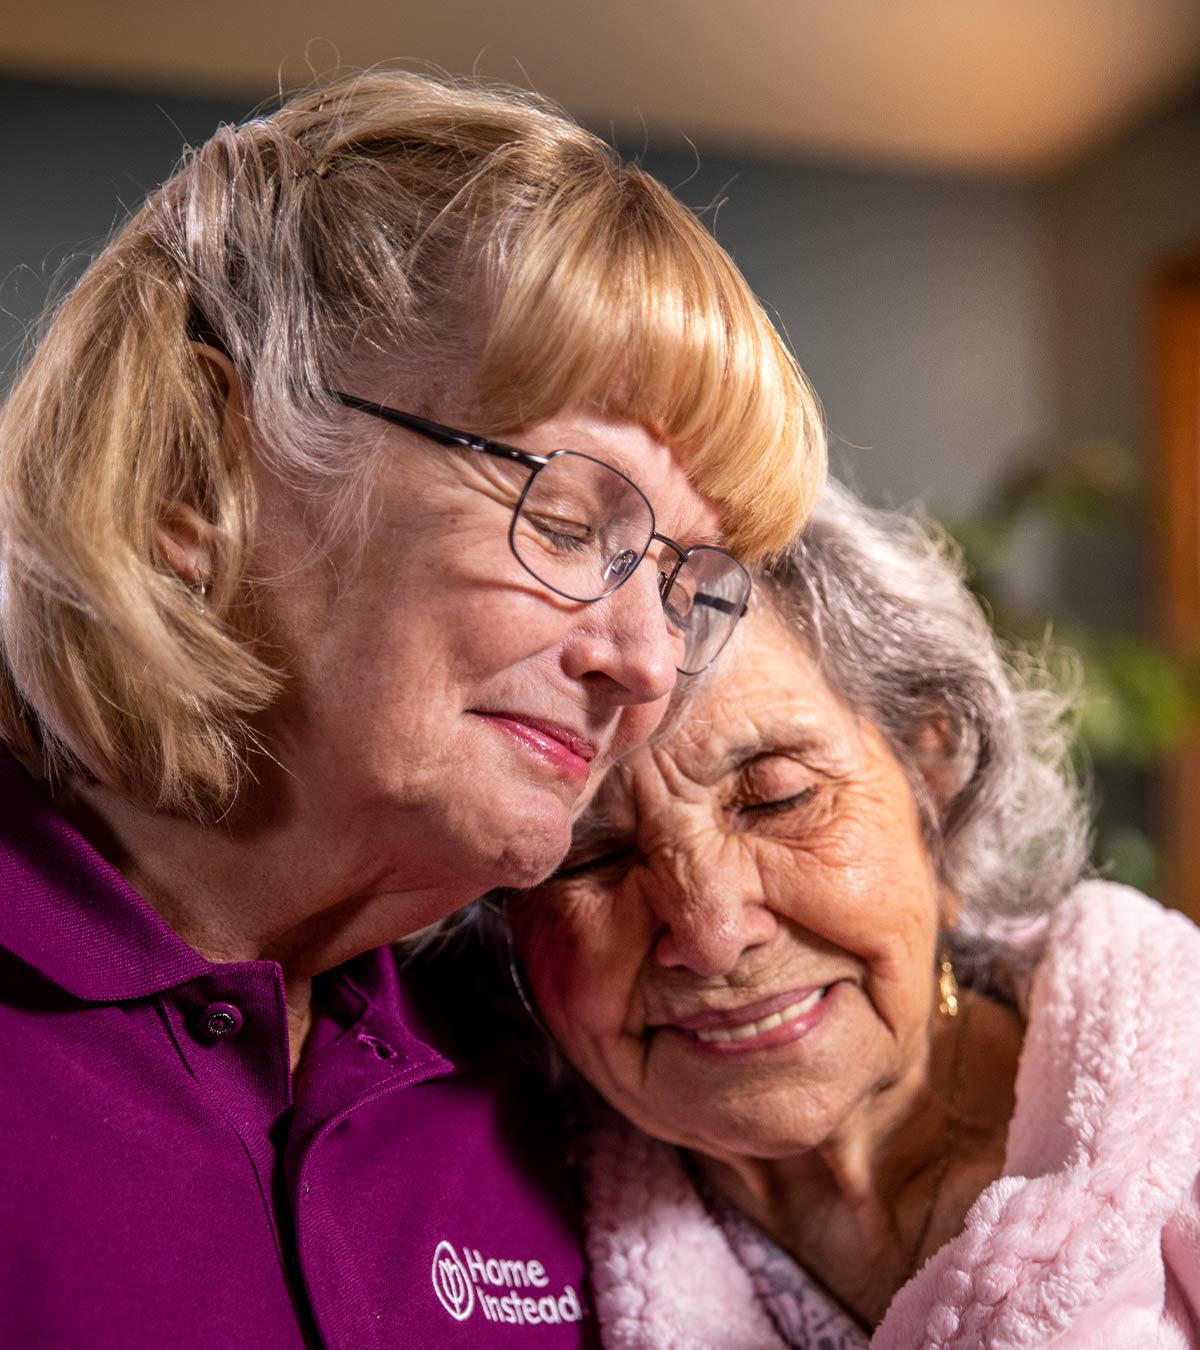 CAREGiver providing in-home senior care services. Home Instead of Calgary, AB provides Elder Care to aging adults. 